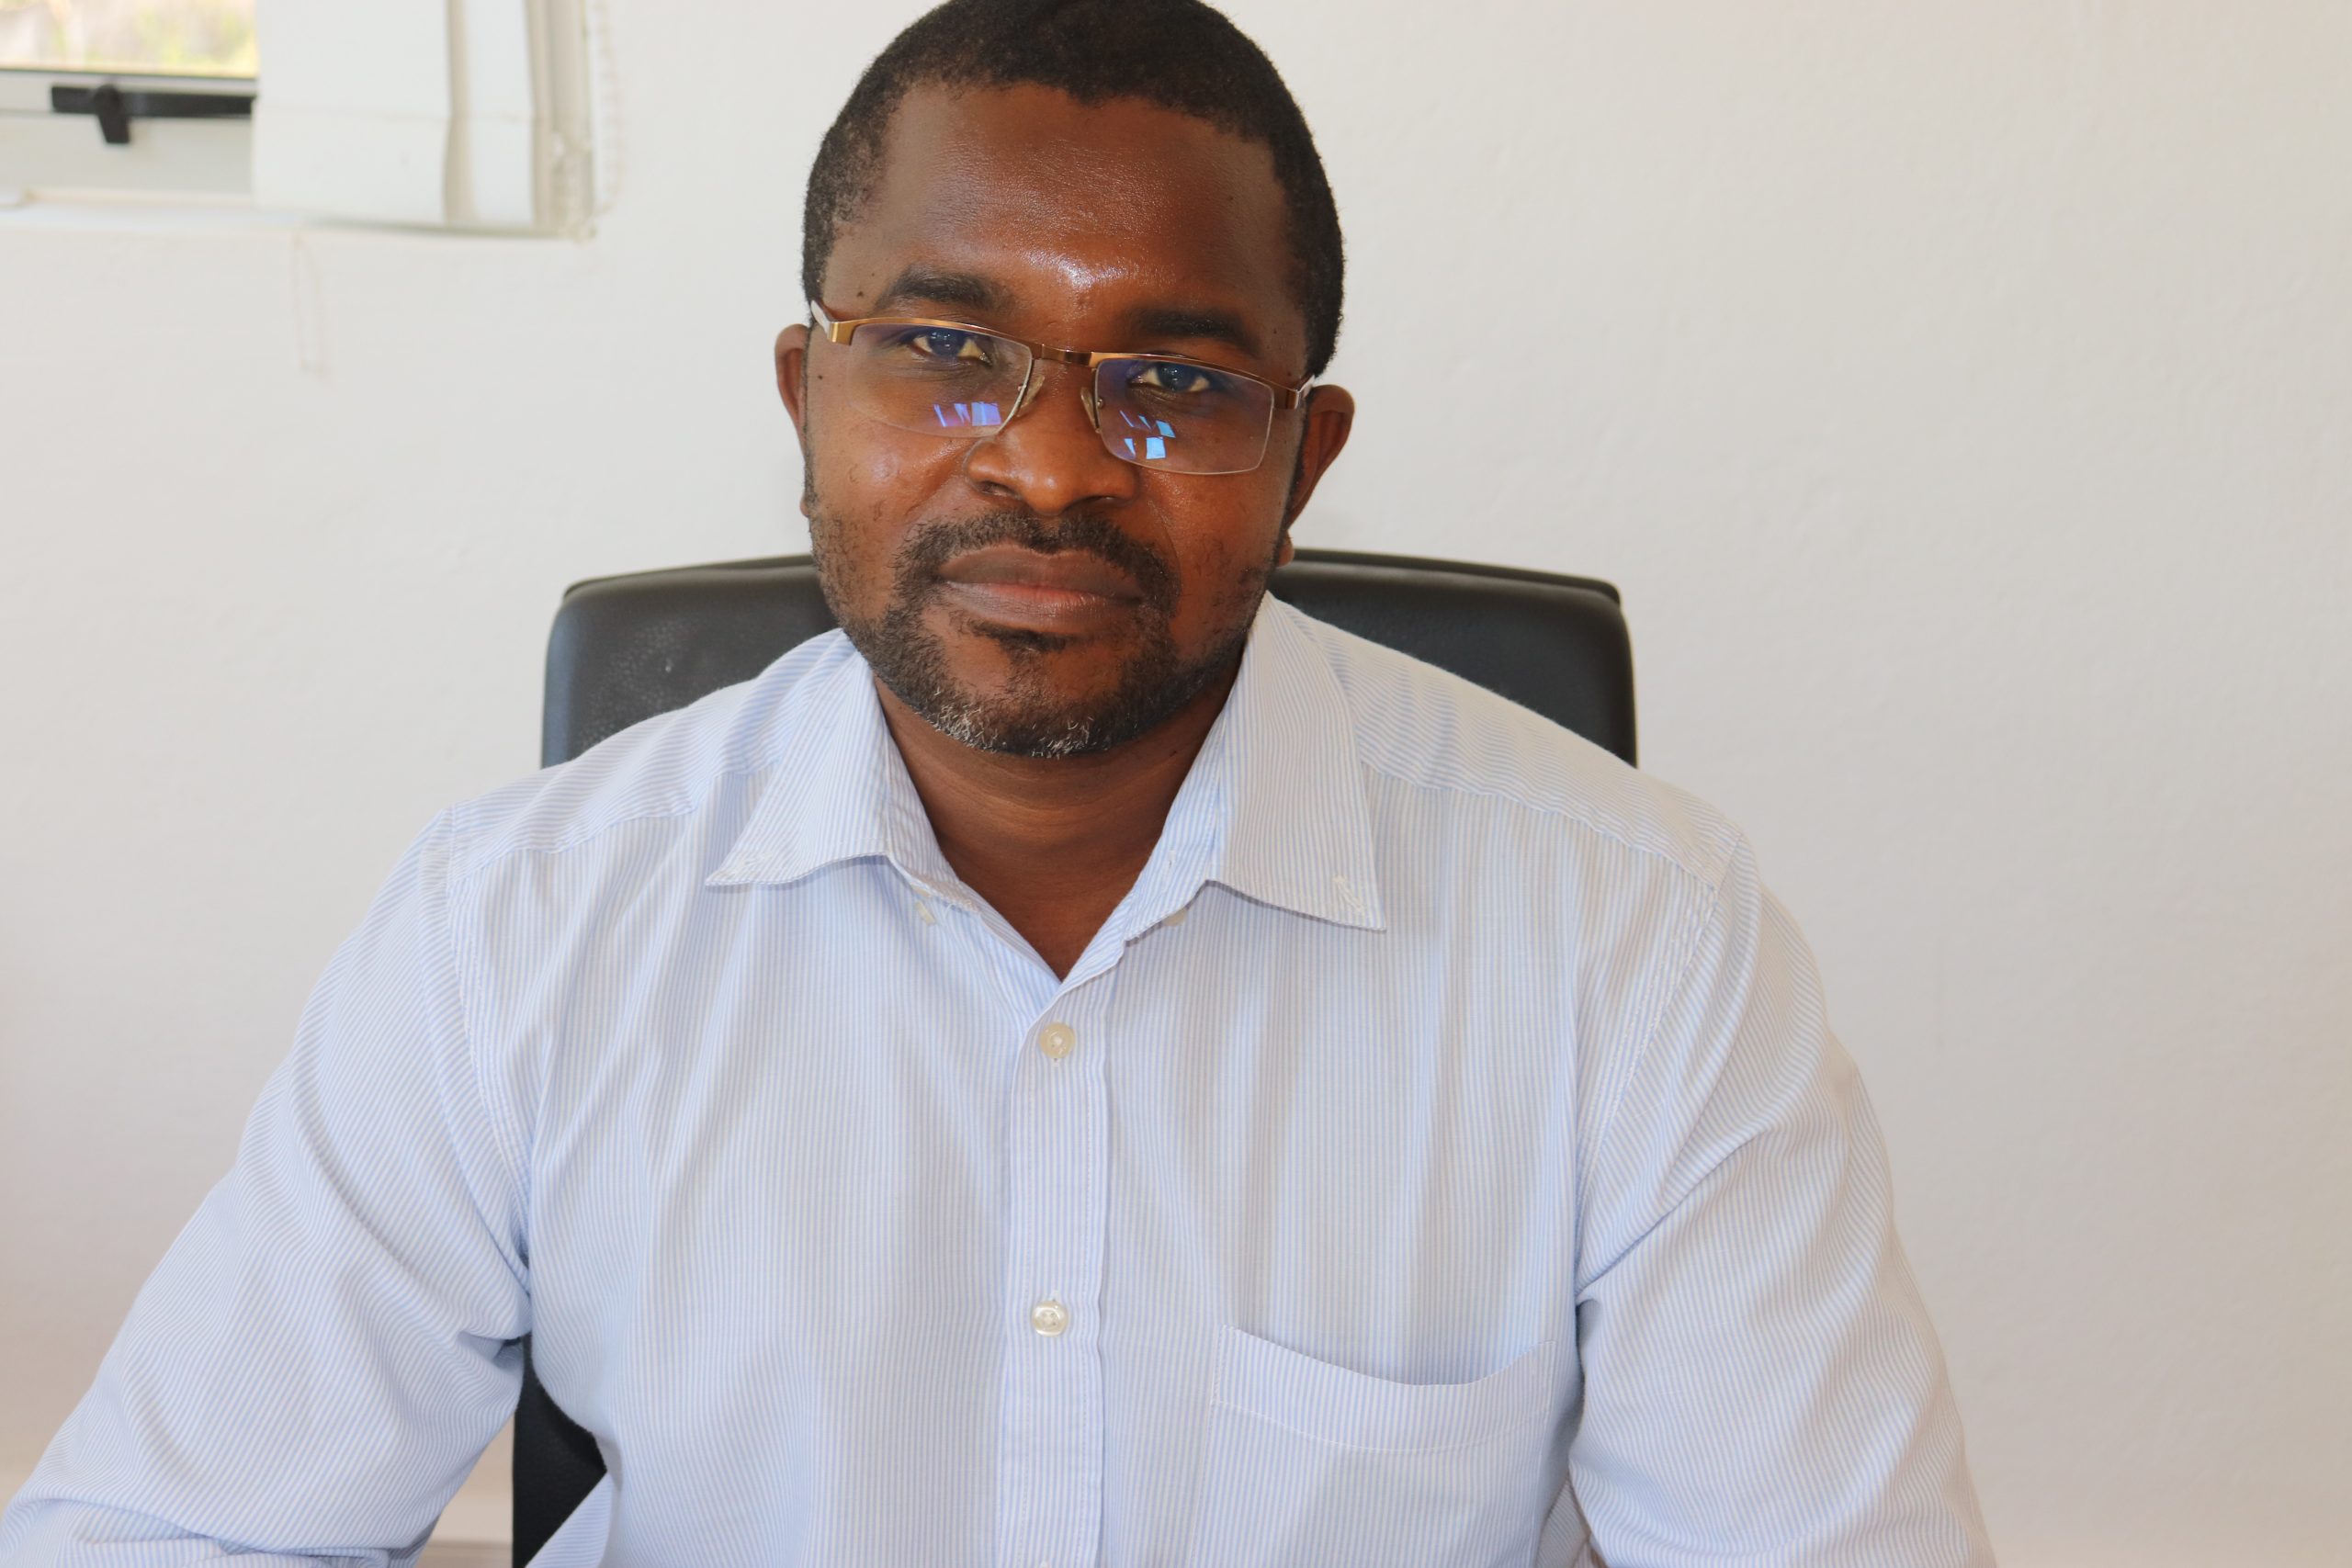 Augusto Jaime is the program director for Catalisa, a TechnoServe program promoting economic opportunities for youth in Cabo Delgado, Mozambique.